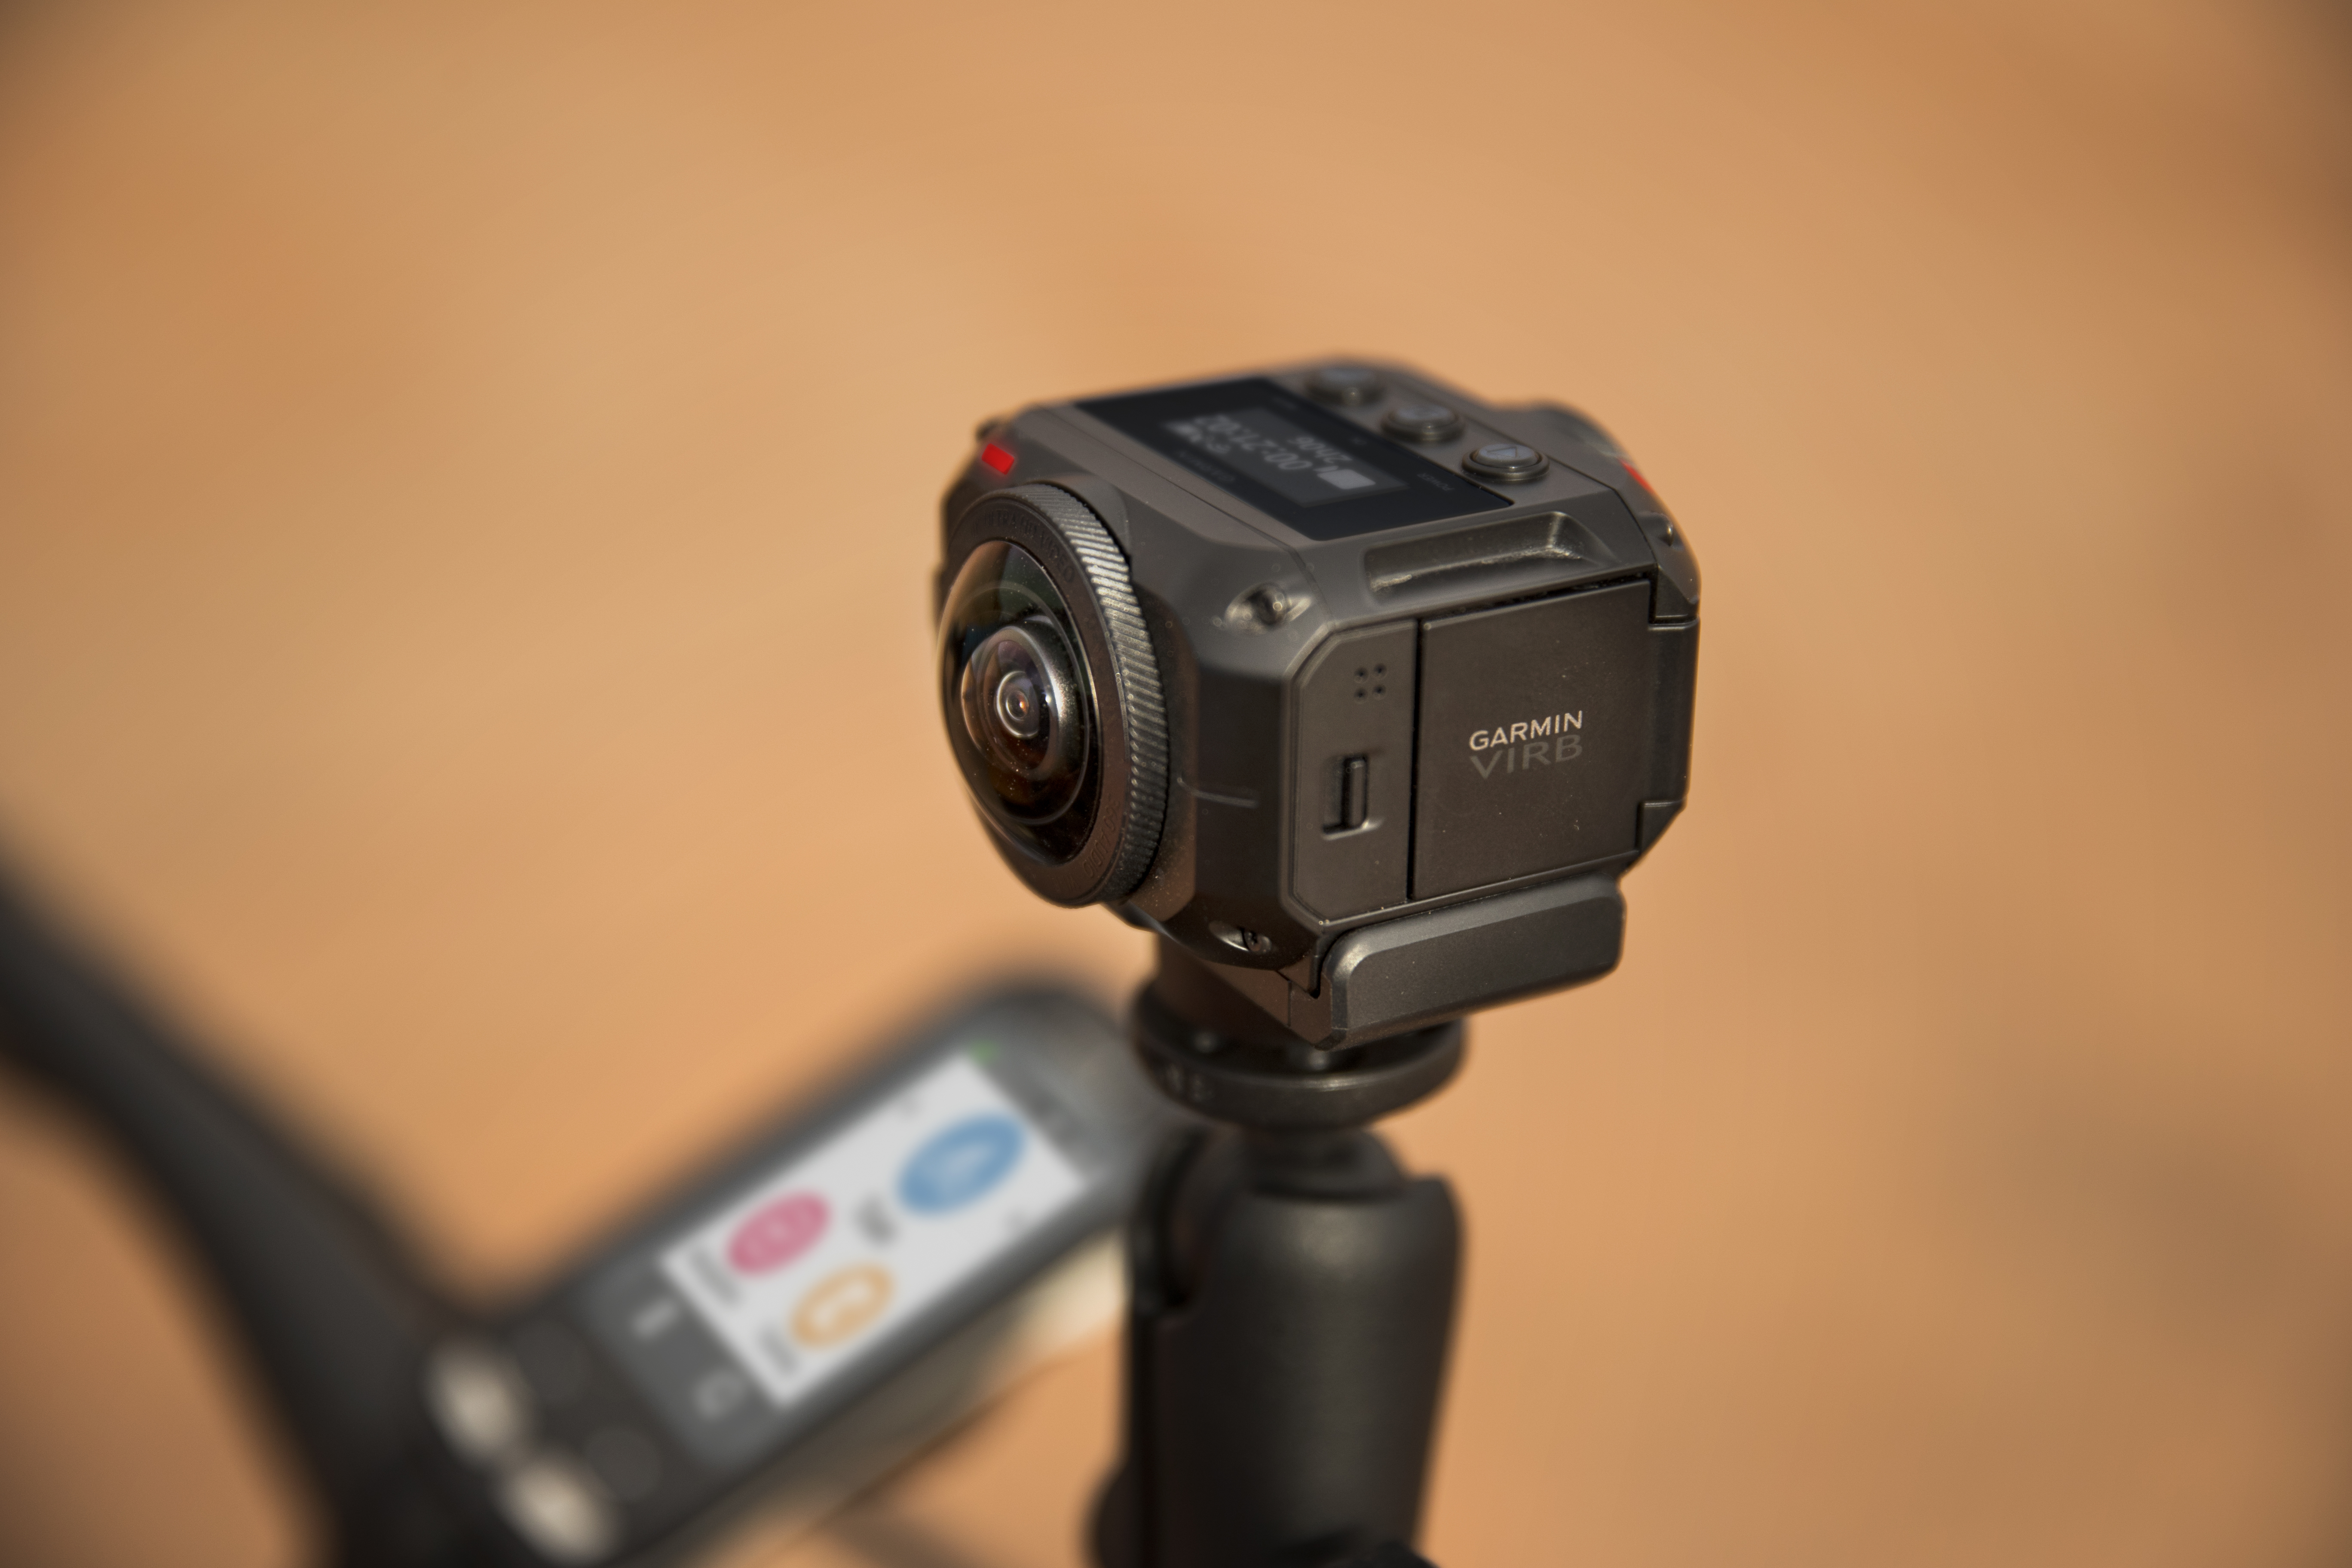 Garmin Introduces Its First 360 Degree Camera The Virb 360 Bicycle